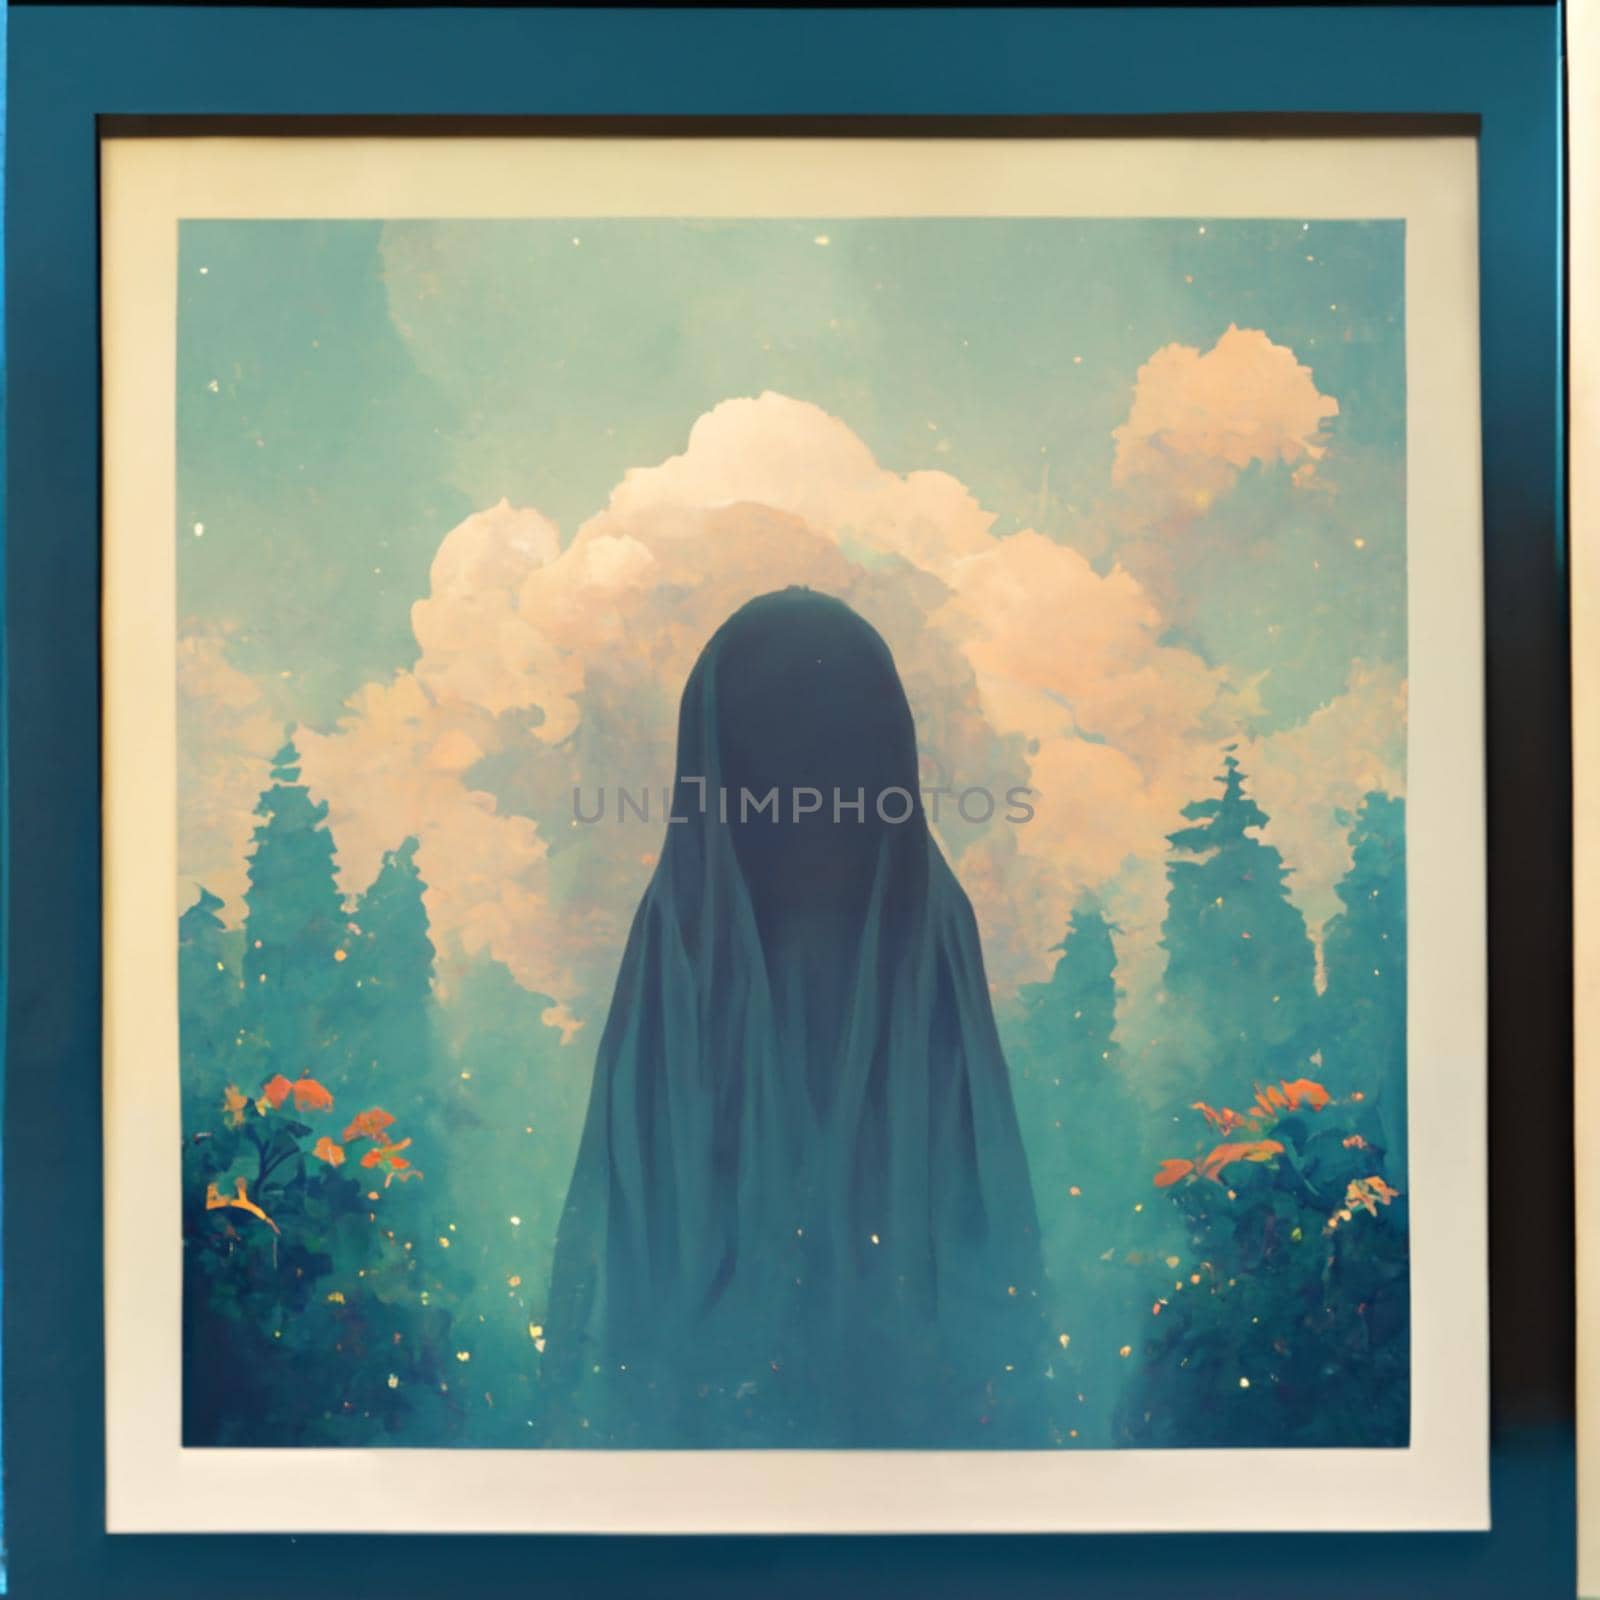 Abstract illustration of a figure against a background of forest and clouds by NeuroSky